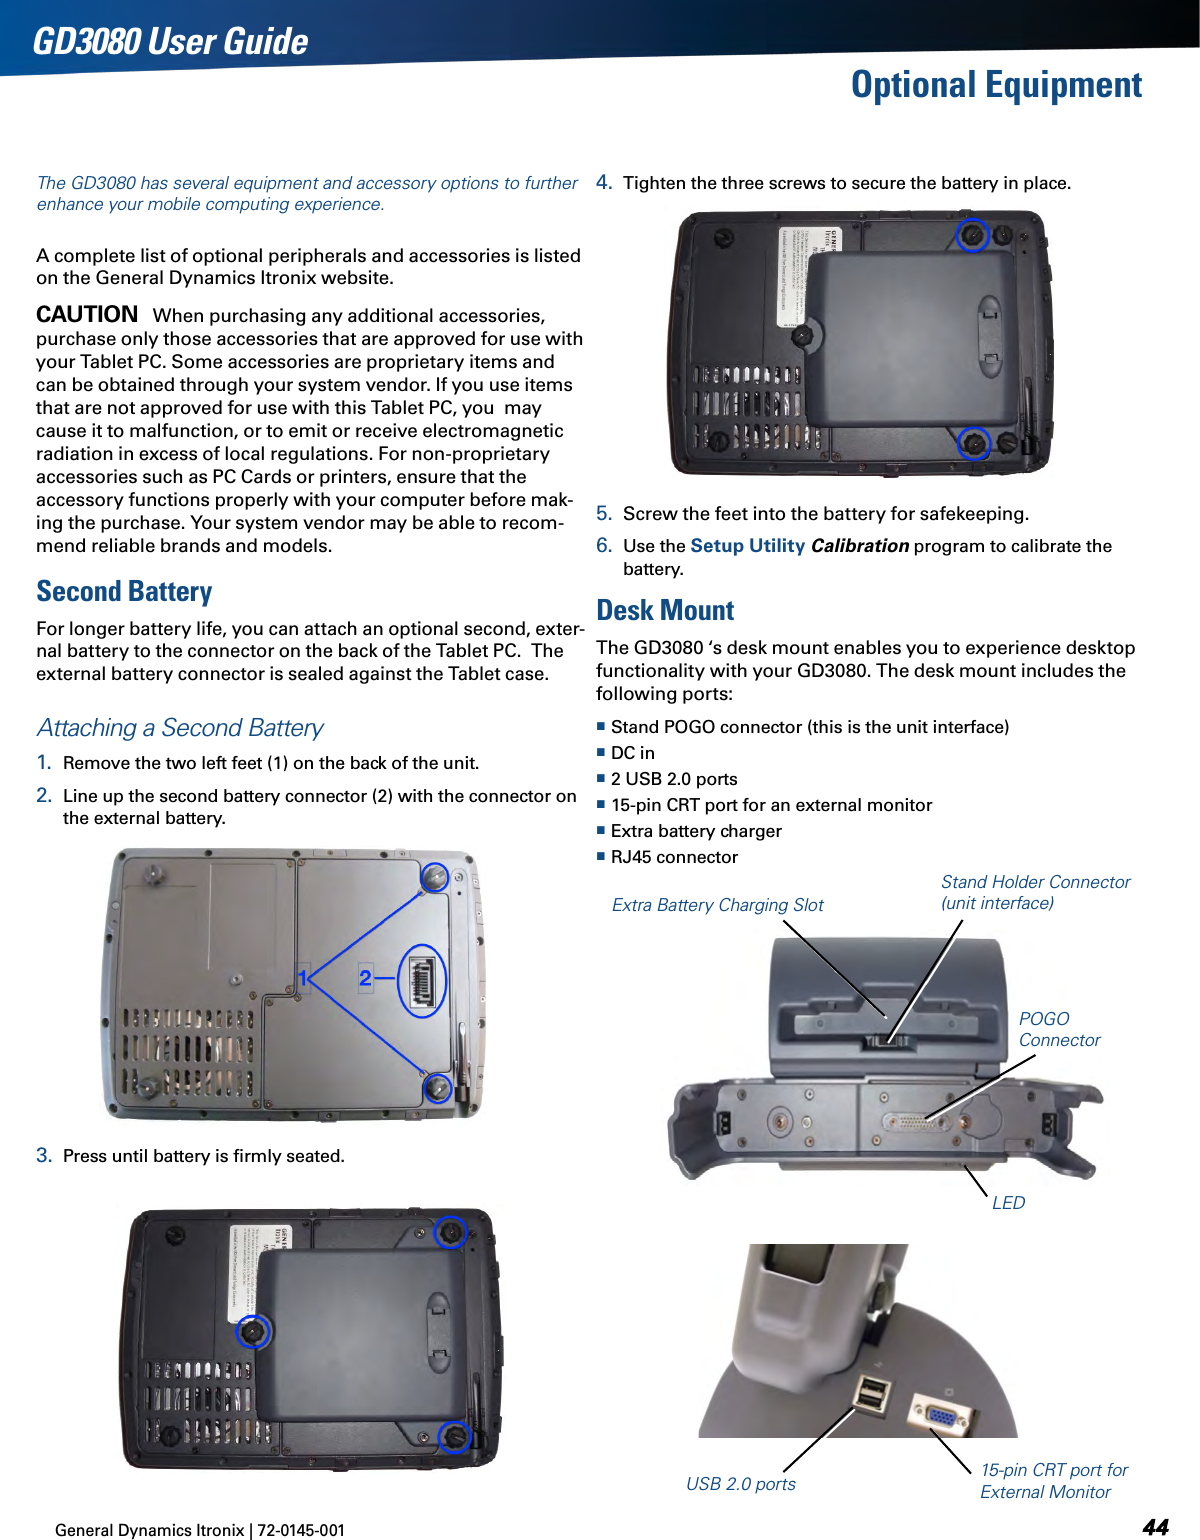 General Dynamics Itronix | 72-0145-001  GD3080 User GuideThe GD3080 has several equipment and accessory options to further enhance your mobile computing experience.A complete list of optional peripherals and accessories is listed on the General Dynamics Itronix website.Caution   When purchasing any additional accessories, purchase only those accessories that are approved for use with your Tablet PC. Some accessories are proprietary items and can be obtained through your system vendor. If you use items that are not approved for use with this Tablet PC, you  may cause it to malfunction, or to emit or receive electromagnetic radiation in excess of local regulations. For non-proprietary accessories such as PC Cards or printers, ensure that the accessory functions properly with your computer before mak-ing the purchase. Your system vendor may be able to recom-mend reliable brands and models. Second BatteryFor longer battery life, you can attach an optional second, exter-nal battery to the connector on the back of the Tablet PC.  The external battery connector is sealed against the Tablet case.Attaching a Second Battery1.  Remove the two left feet (1) on the back of the unit.2.  Line up the second battery connector (2) with the connector on the external battery. 3.  Press until battery is ﬁrmly seated. 4.  Tighten the three screws to secure the battery in place.5.  Screw the feet into the battery for safekeeping.6.  Use the Setup Utility Calibration program to calibrate the battery.Desk MountThe GD3080 ‘s desk mount enables you to experience desktop functionality with your GD3080. The desk mount includes the following ports: Stand POGO connector (this is the unit interface) DC in 2 USB 2.0 ports 15-pin CRT port for an external monitor Extra battery charger RJ45 connectorOptional EquipmentExtra Battery Charging SlotStand Holder Connector (unit interface)LED15-pin CRT port for External MonitorUSB 2.0 portsPOGO Connector